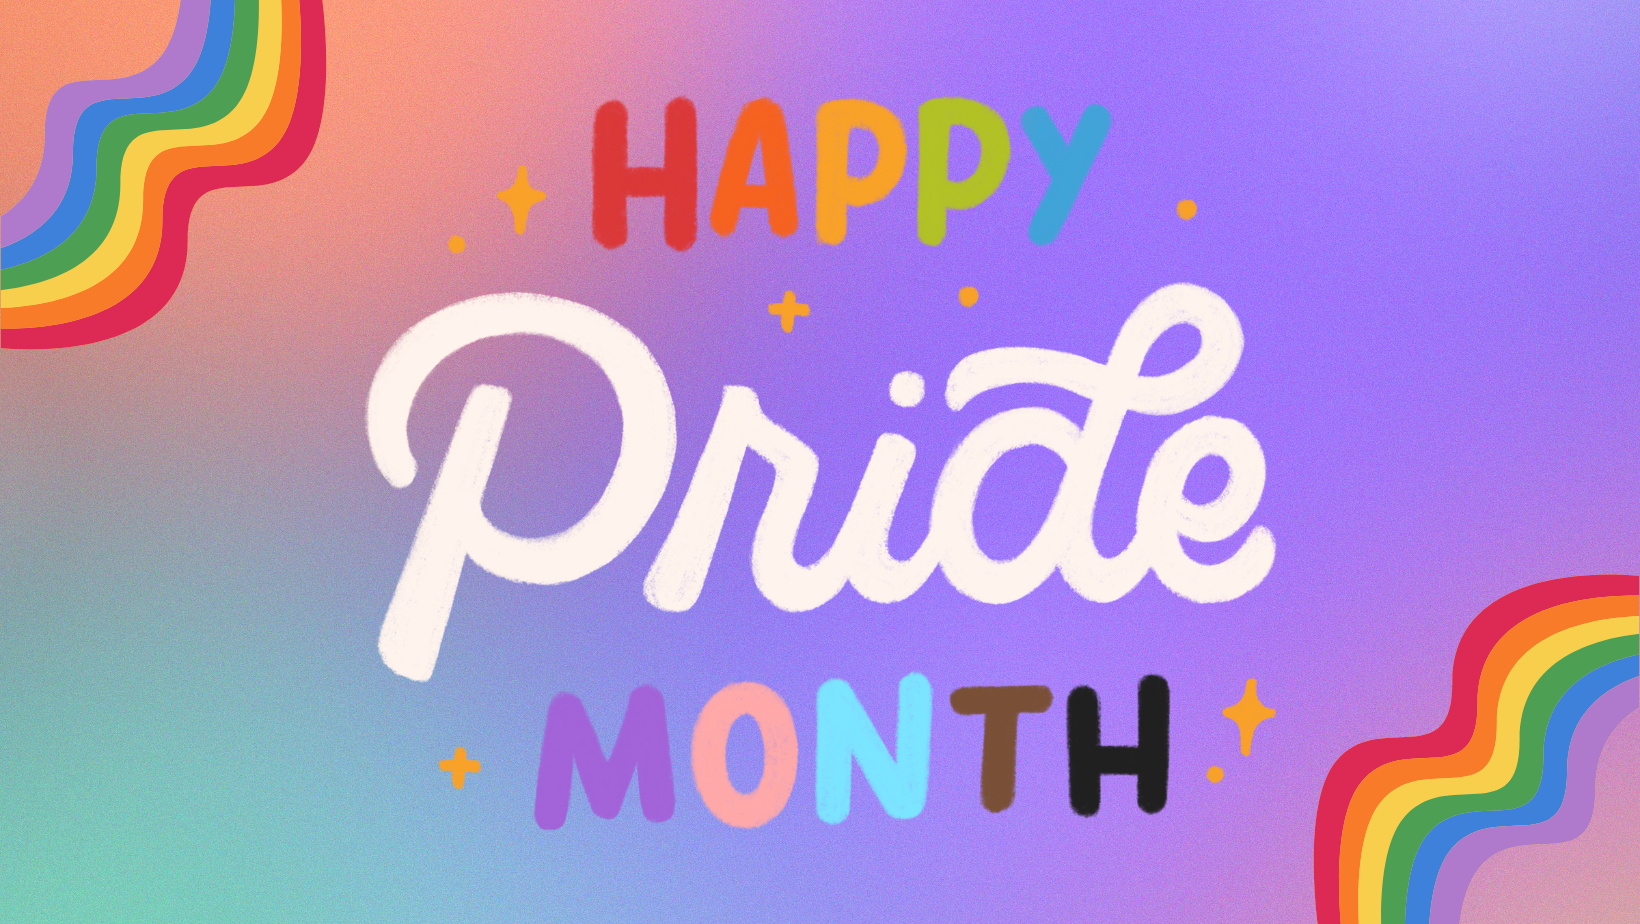 Happy Pride Month over a background of LGBTQ+ colors